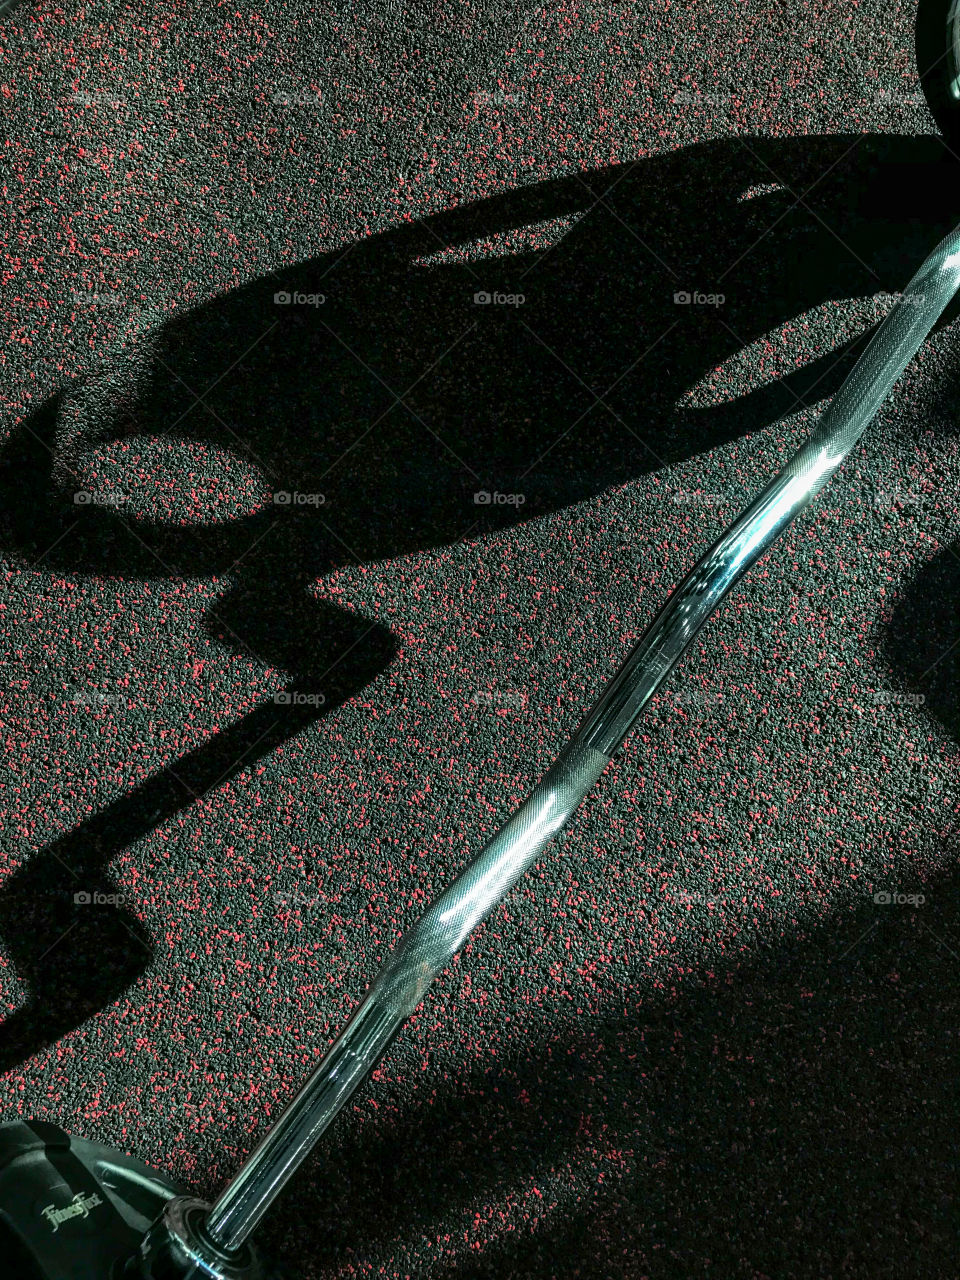 Gym equipment with morning shadow 